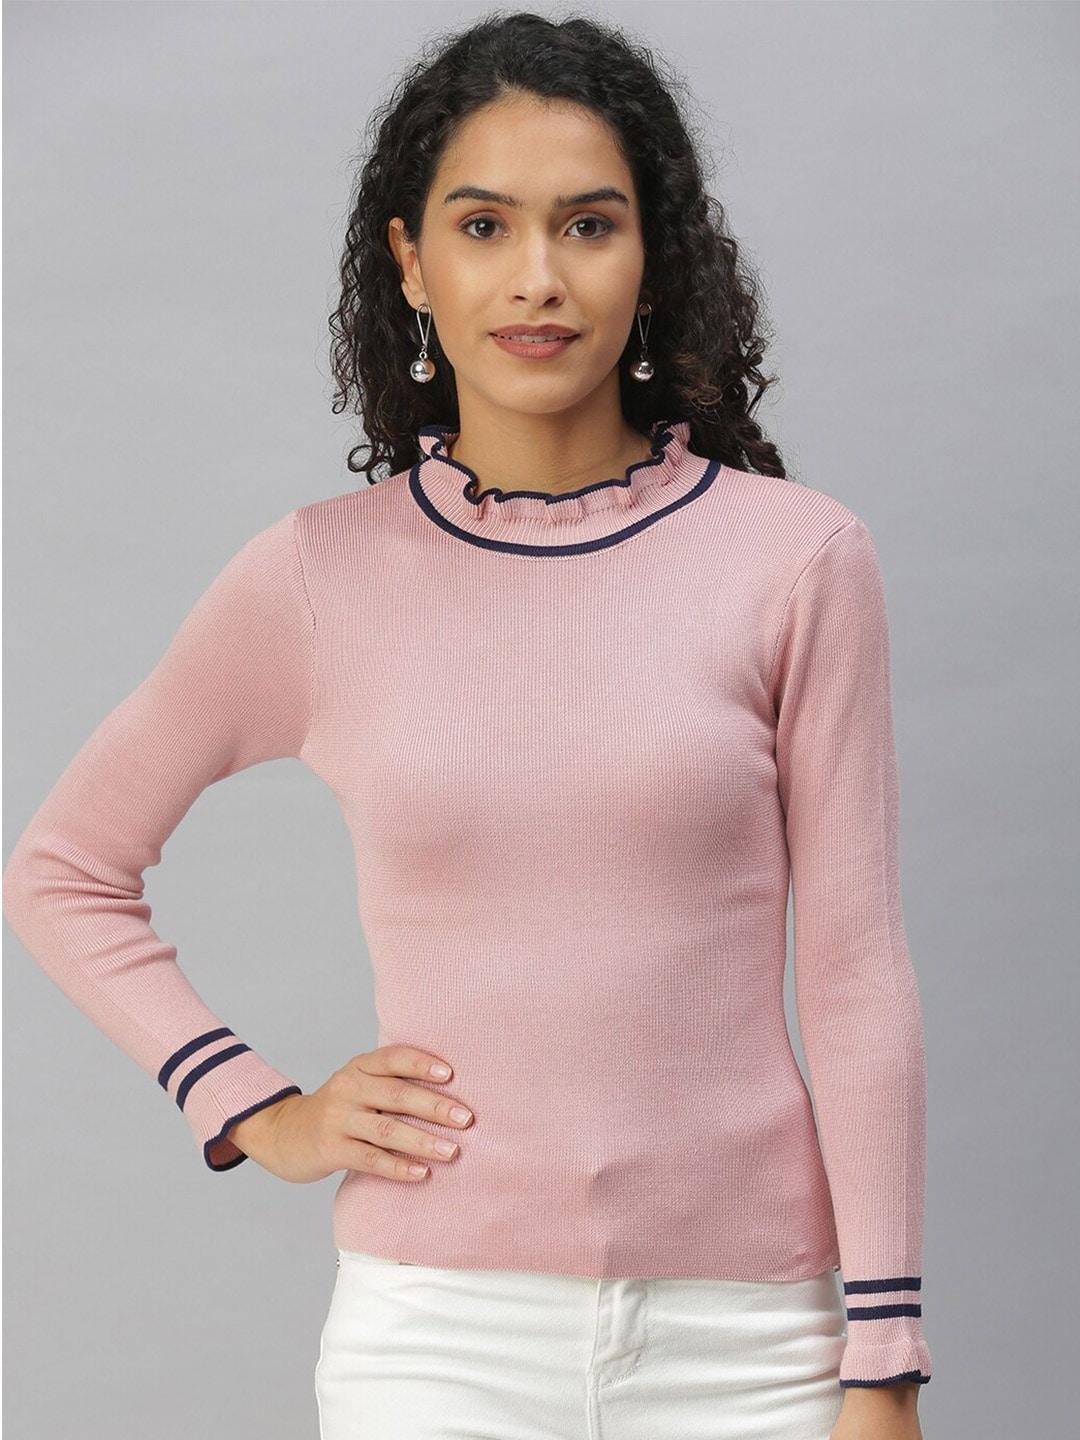 showoff-high-neck-long-sleeves-ruffled-fitted-top